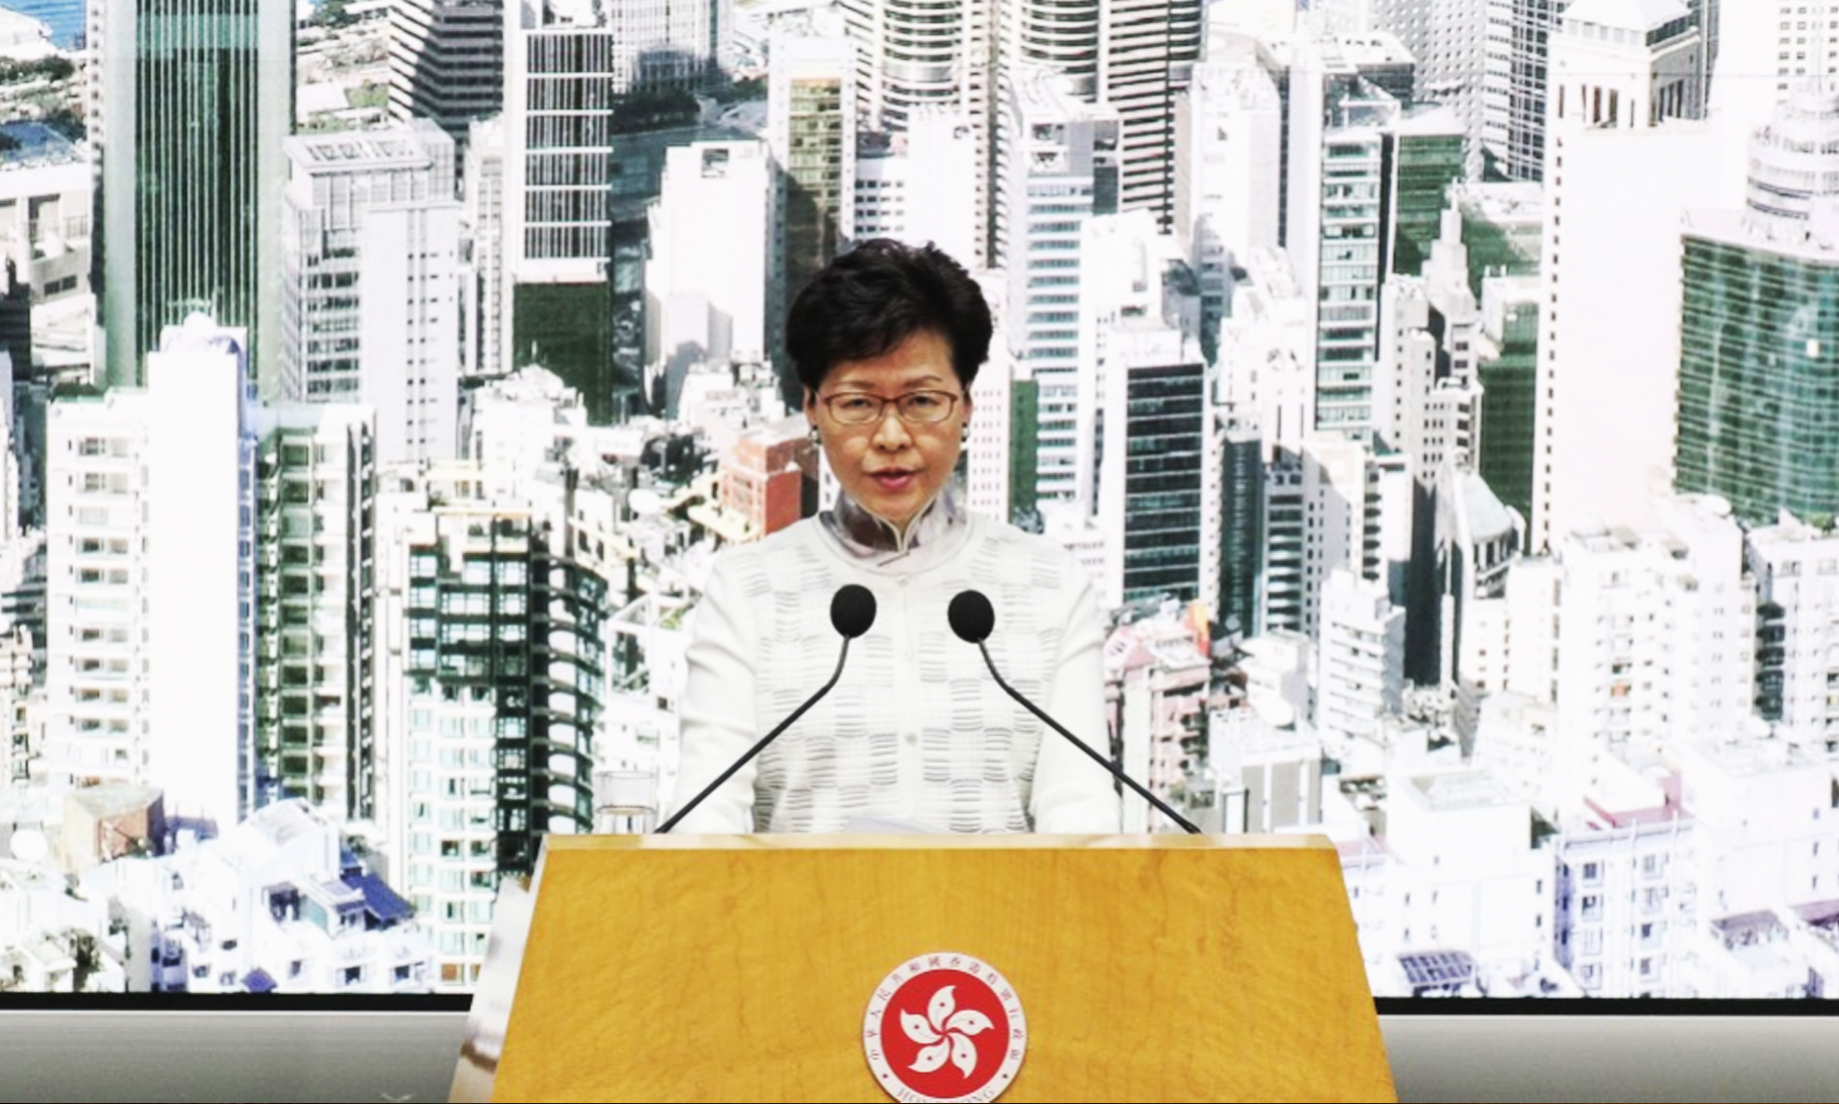 Hong Kong leader says extradition bill is ‘dead’